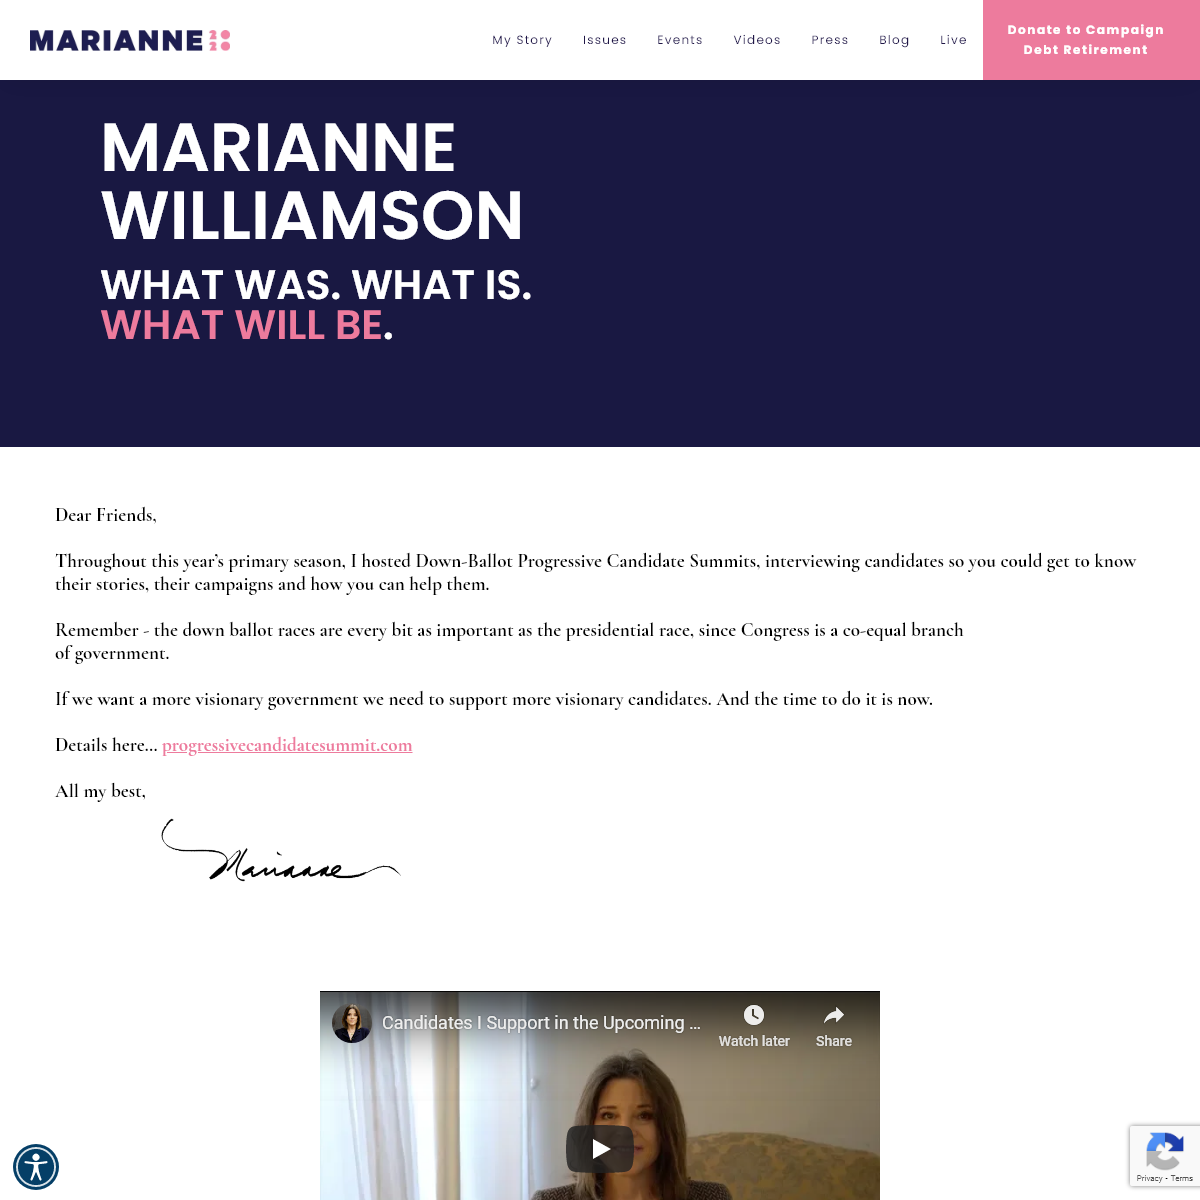 A complete backup of marianne2020.com